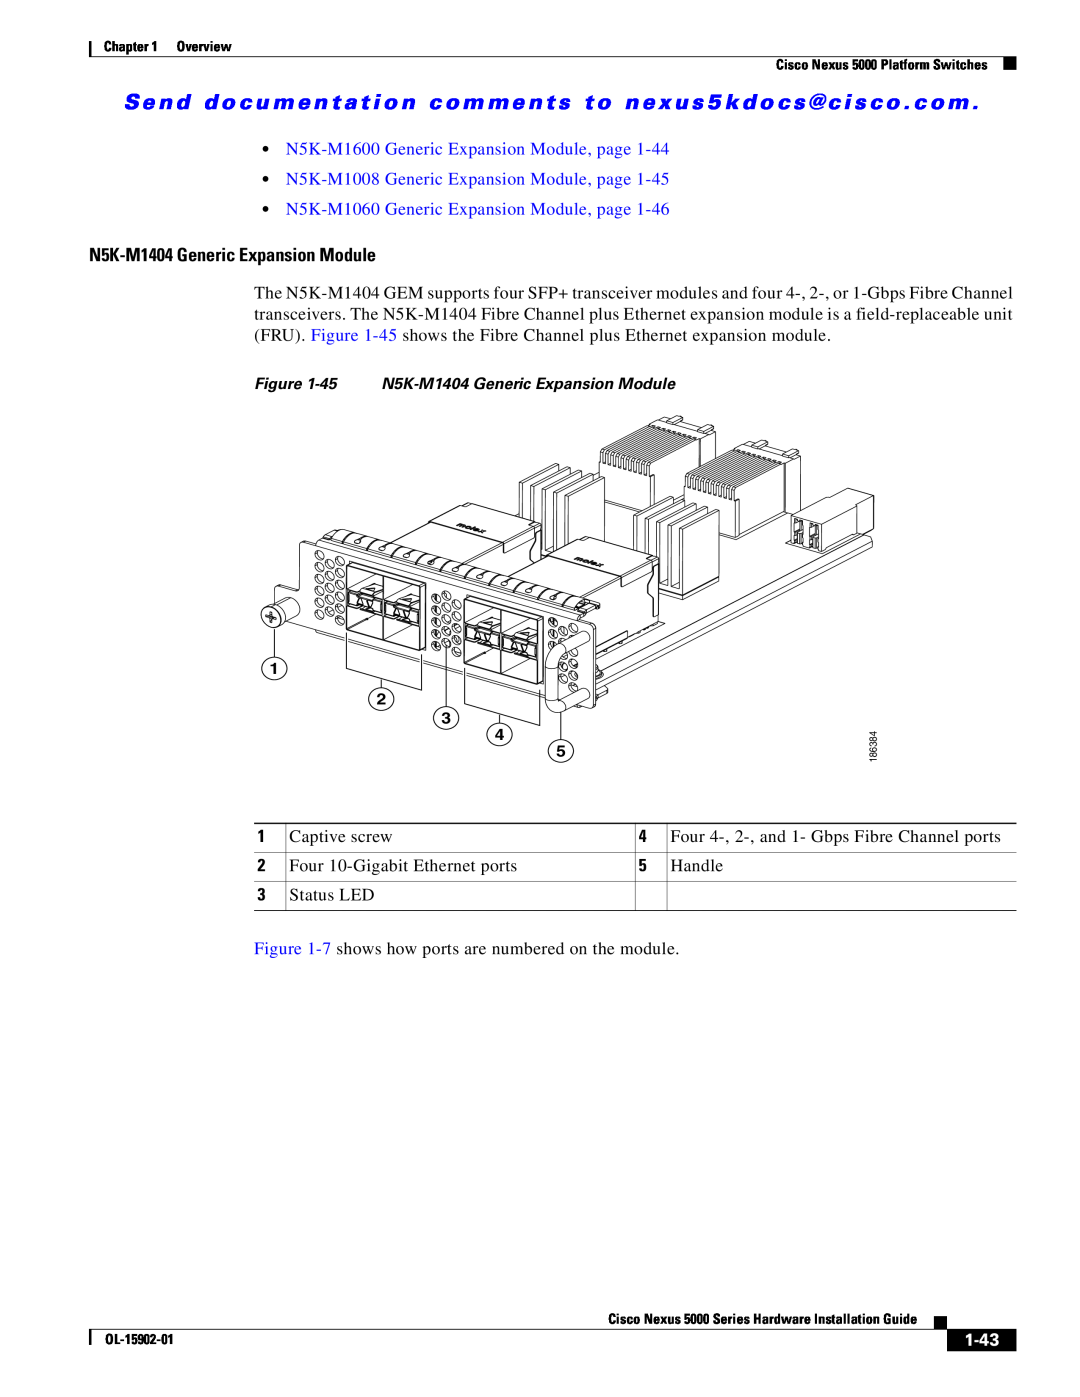 Cisco Systems 5000 manual N5K-M1404 Generic Expansion Module, N5K-M1600 Generic Expansion Module, page, 1-43 